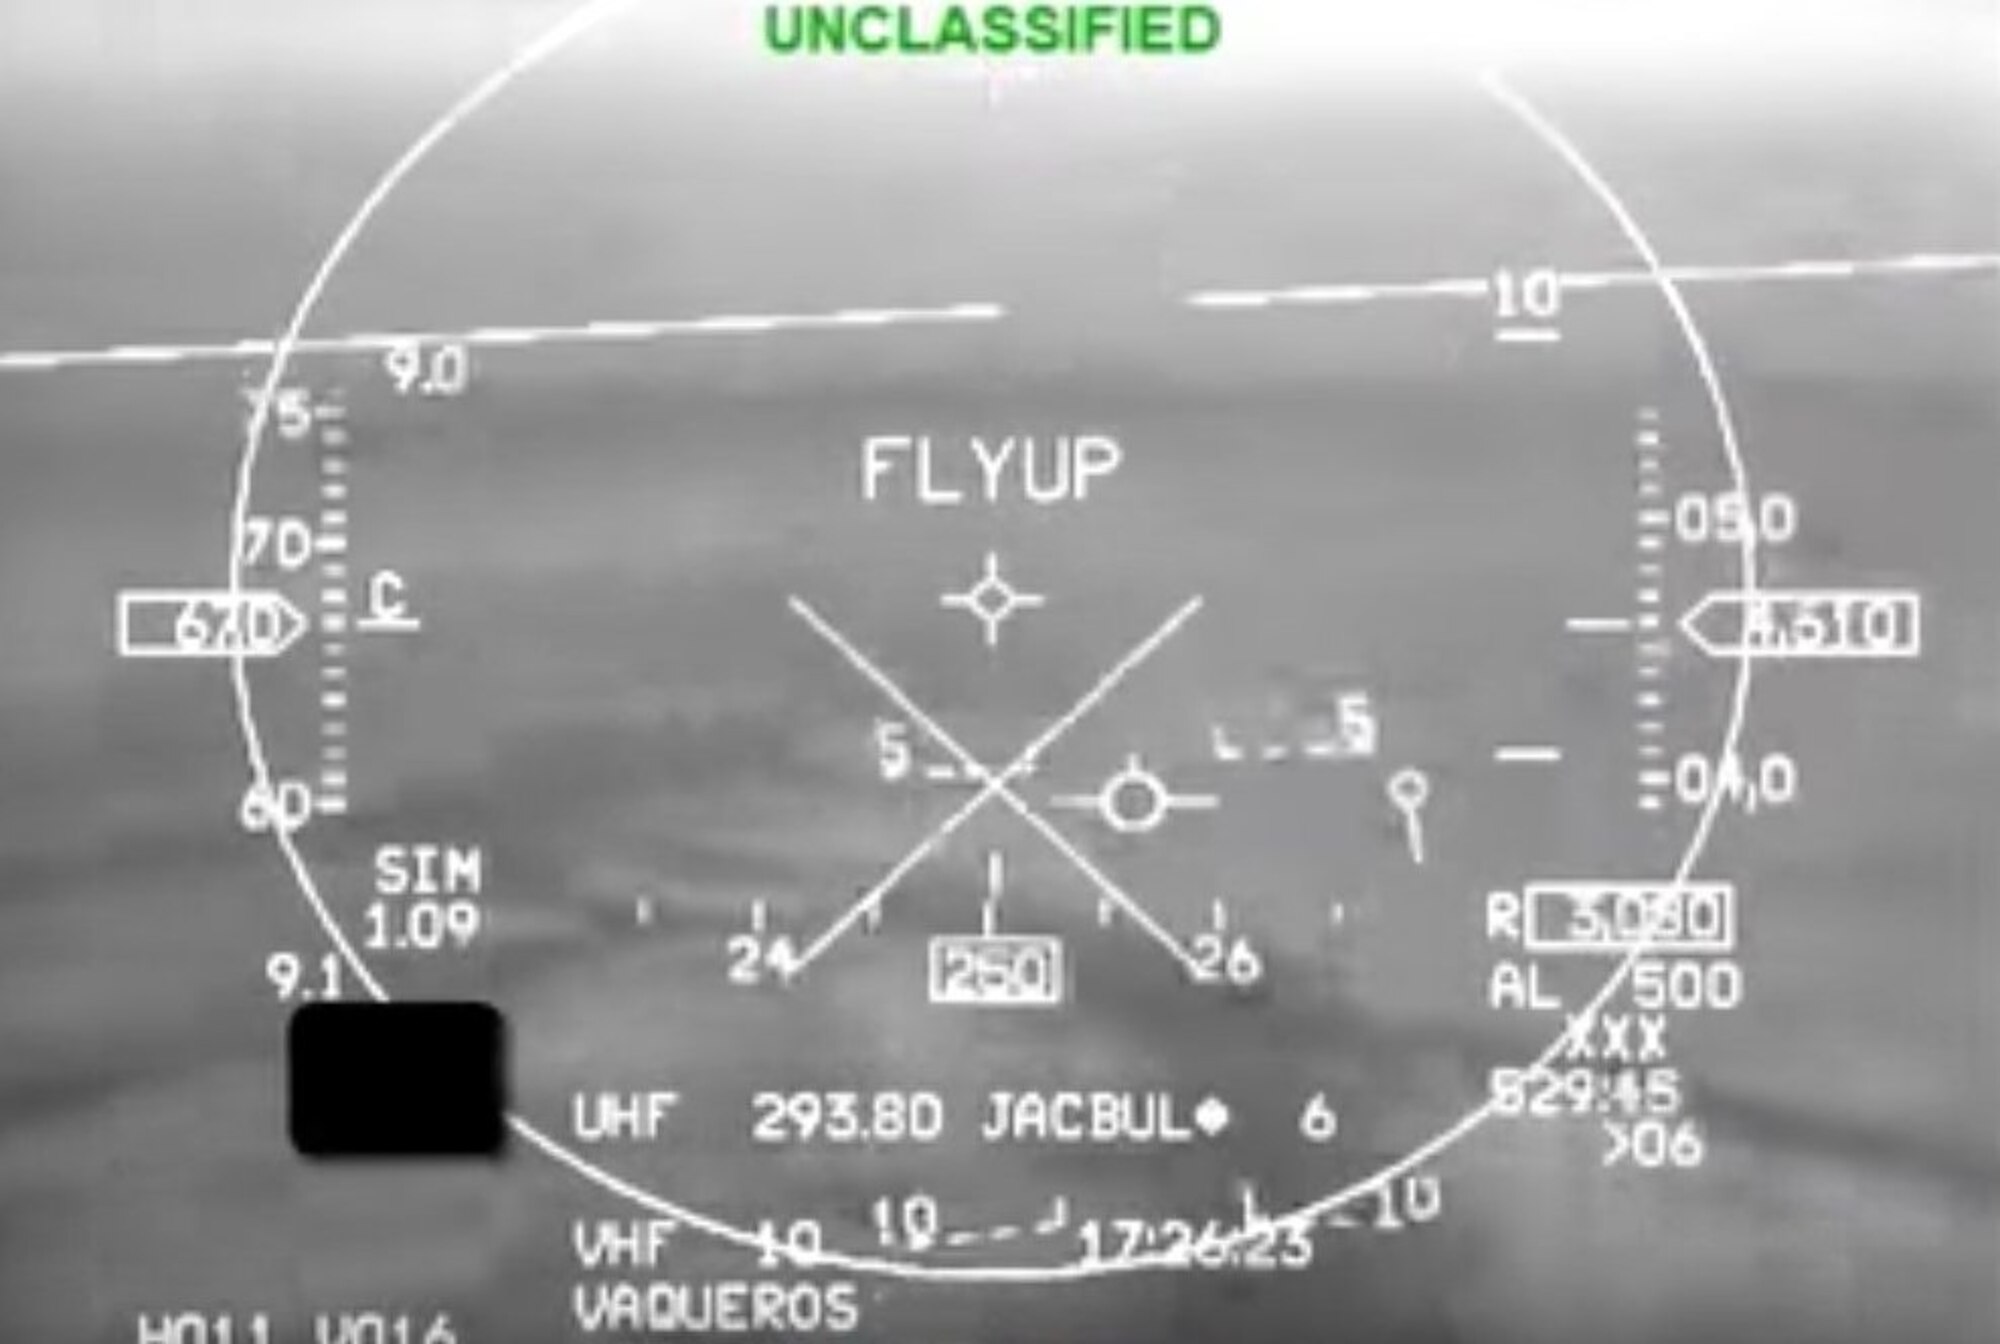 Declassified video footage from the head-up-display of a U.S. Air Force Arizona Air National Guard F-16 records the moment when the aircraftâs Automatic Ground Collision Avoidance System took control and saved the F-16 and its unconscious pilot from a ground crash in May 2016. The system engaged after the student pilot suffered G-induced loss of consciousness (G-LOC) and the aircraft started an uncontrolled steep descent from 17,000 feet while in full afterburner. (U.S. Air Force photo)